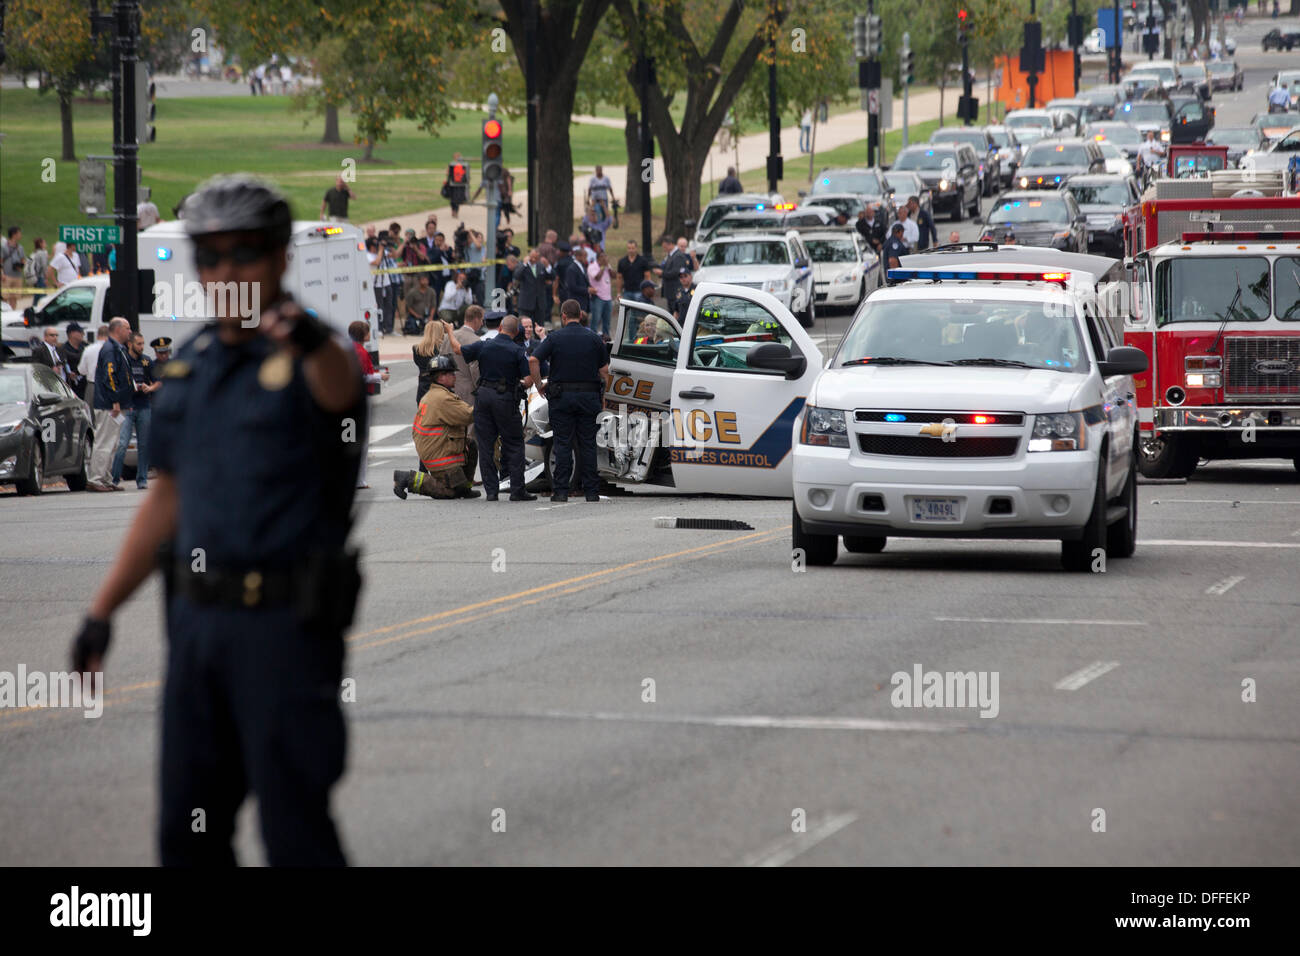 Washington, DC, USA. 3rd Oct, 2013:  US Secret Service and Capitol Police chase a woman who tried to ram security gate at the White House with her car.  A car chase ensues from the White House to the US Capitol building.  The chase ends in a crash, shots are fired by Capitol Police.  The woman driver is confirmed dead, a Capitol Policeman is injured. © B Christopher/Alamy Live News Stock Photo